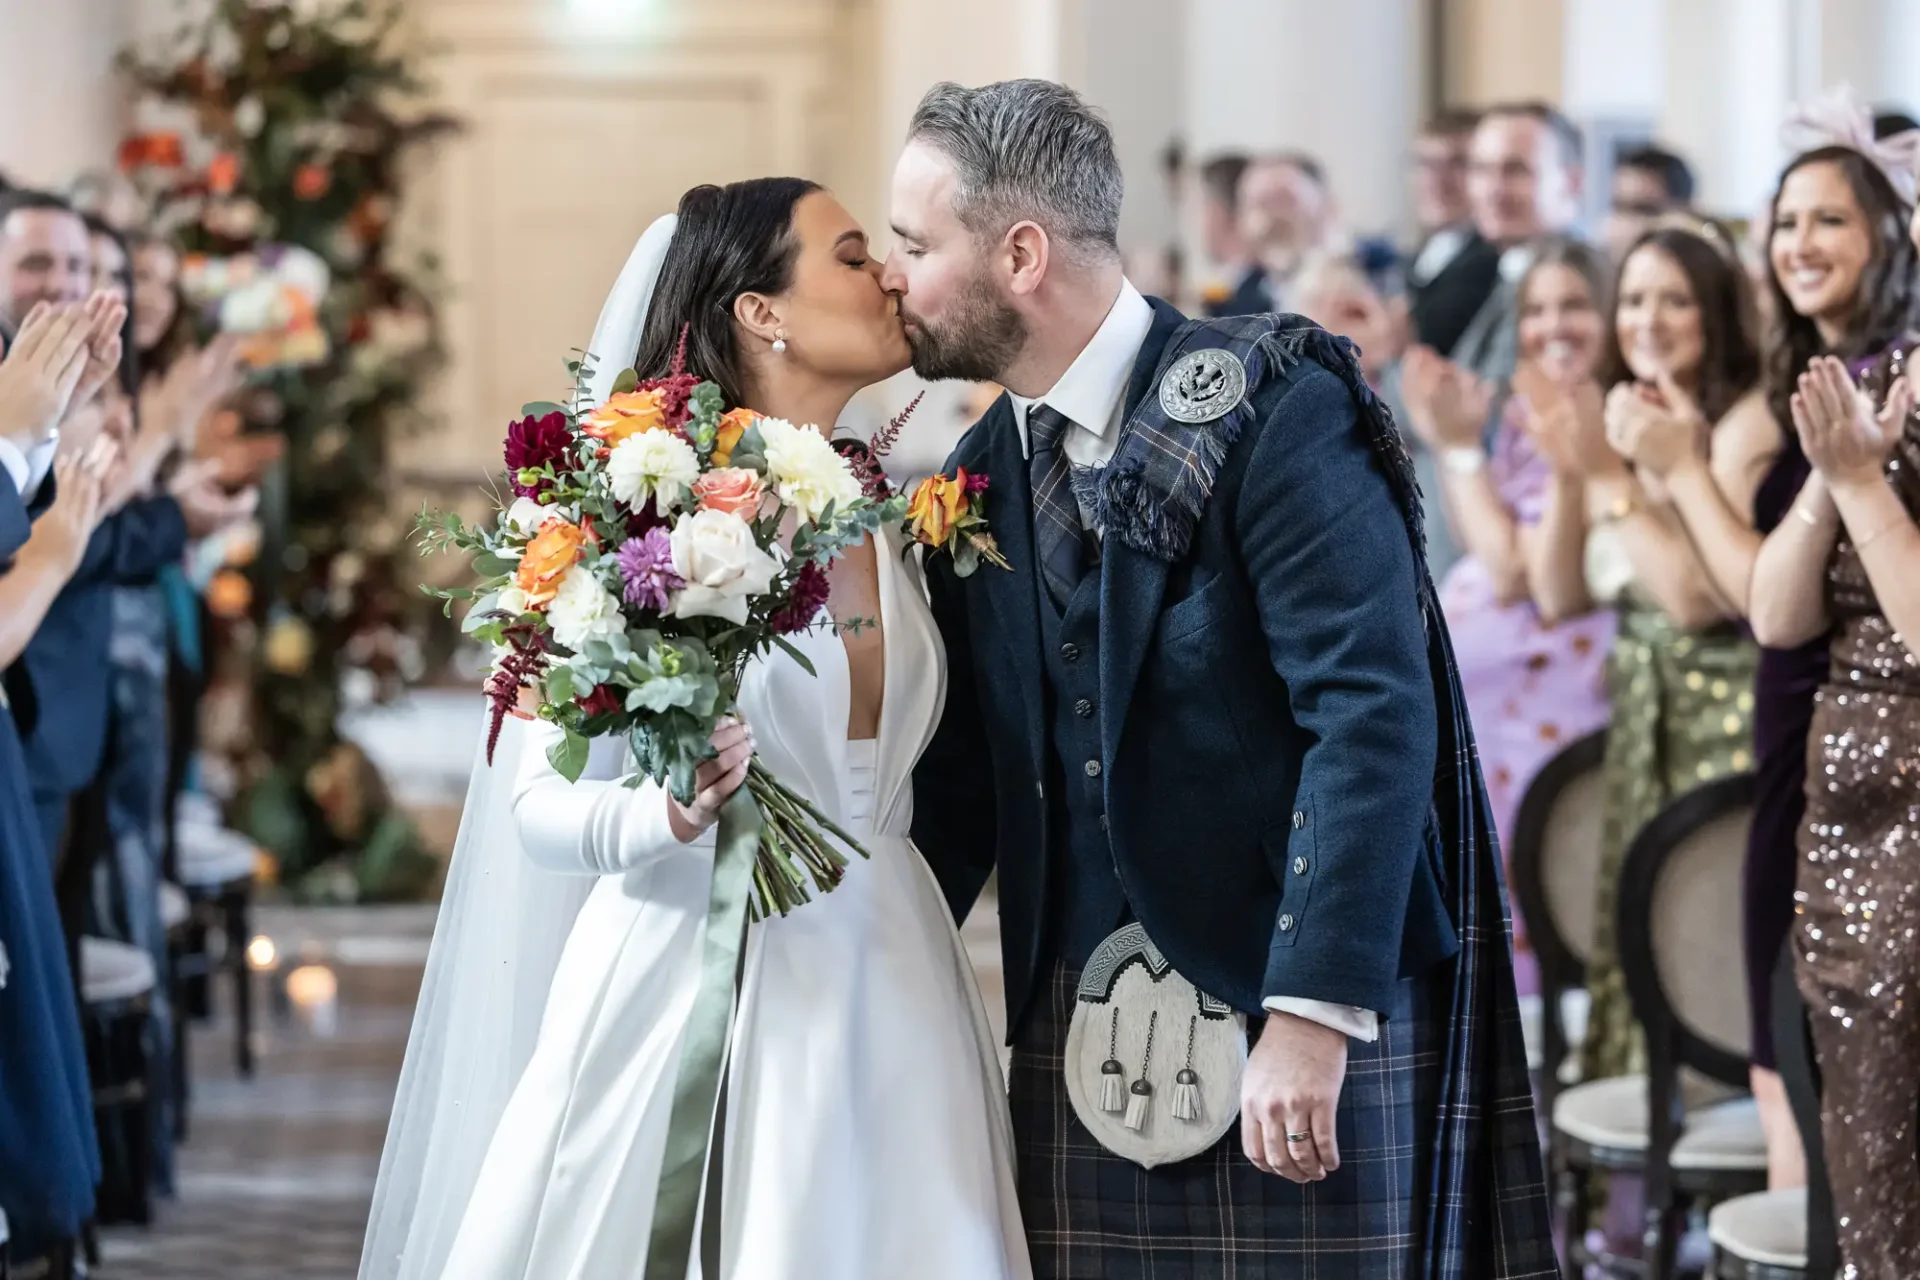 Bride and groom kissing, the groom in a kilt, at their wedding ceremony with guests clapping around them.